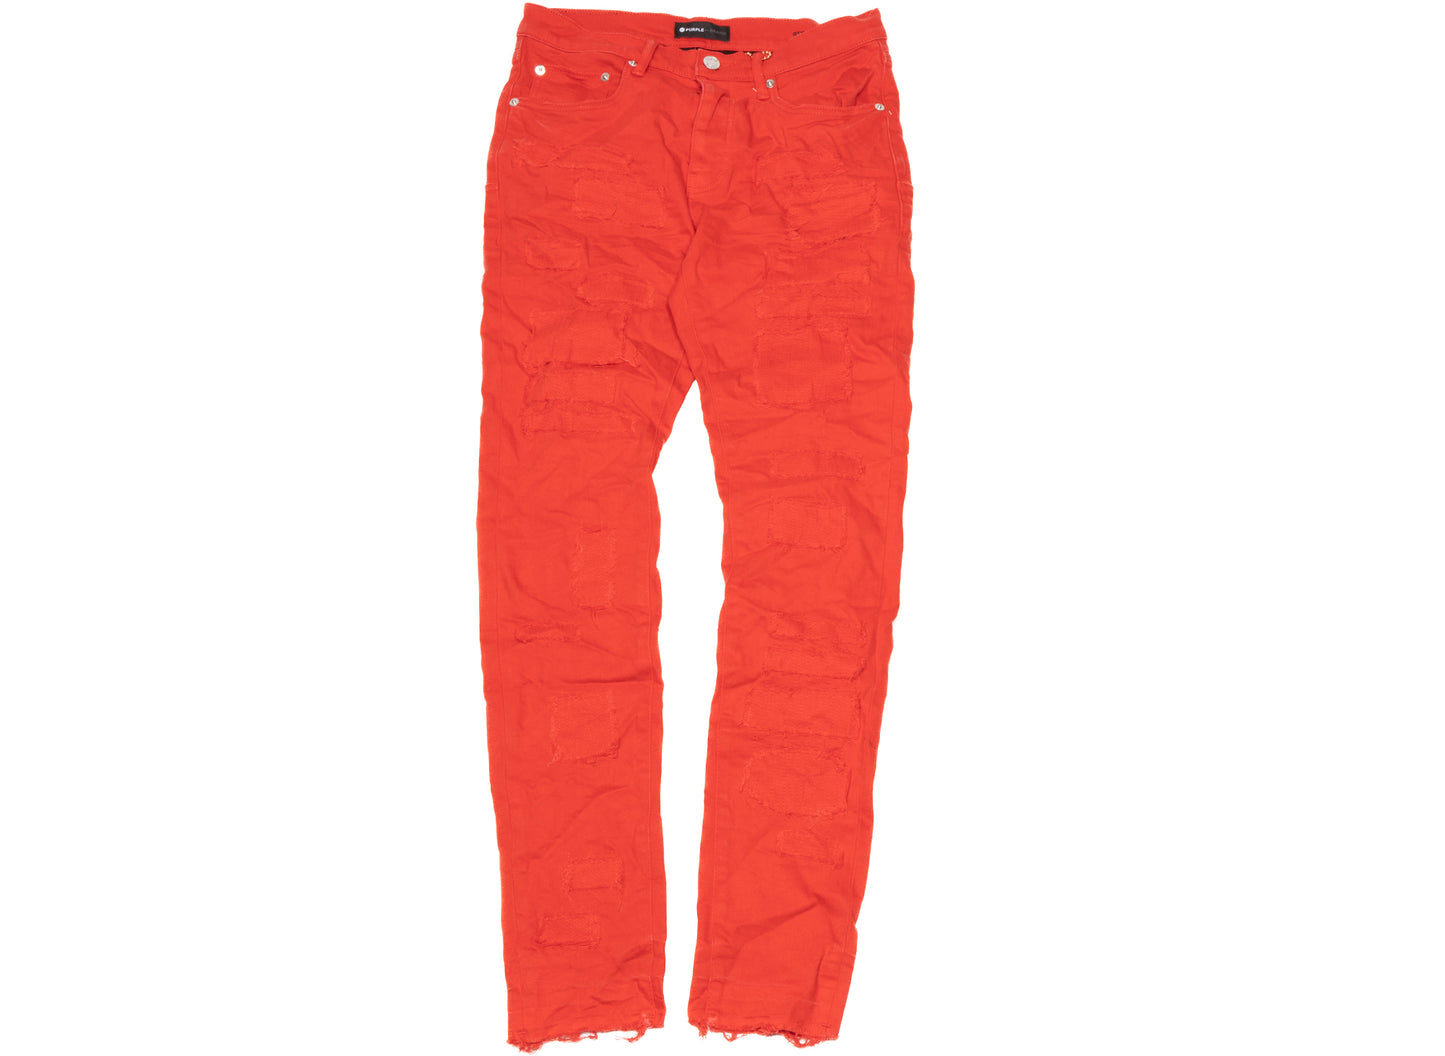 Purple Brand High Risk Red Patch Repair Jeans